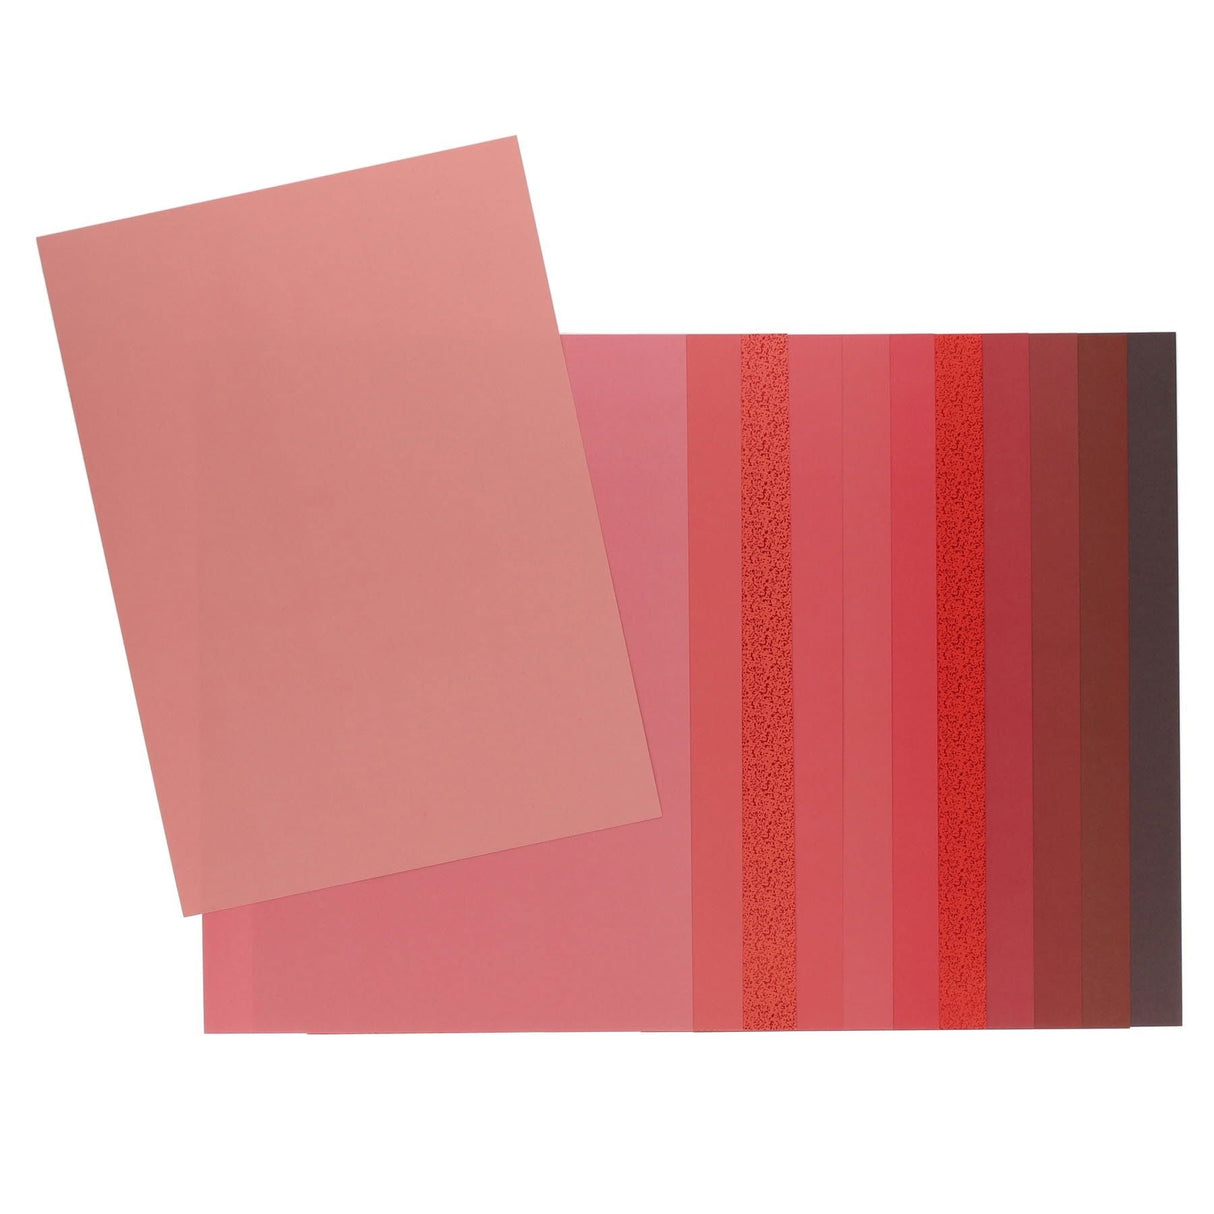 Premier Activity A4 Paper Pad - 24 Sheets - 180gsm - Shades of Red-Craft Paper & Card-Premier|StationeryShop.co.uk